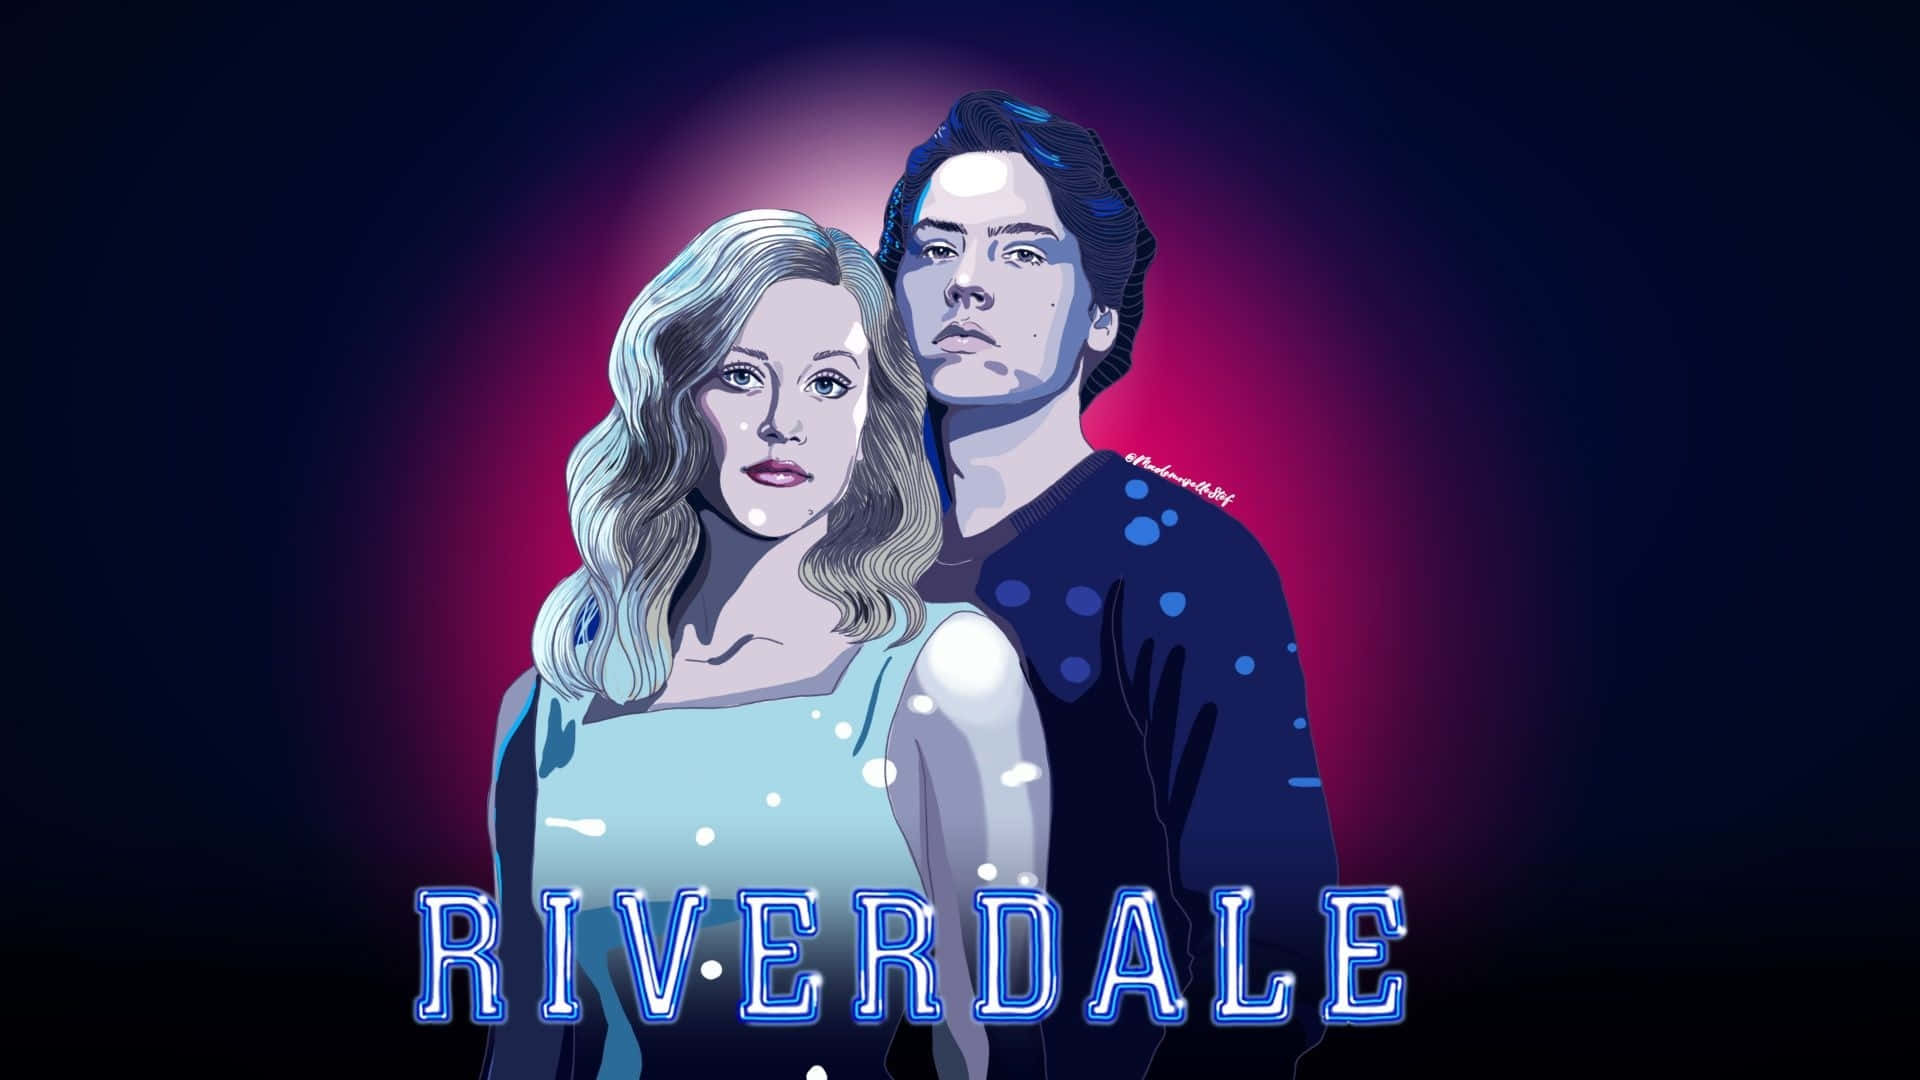 Welcome to Riverdale, the town with pep!